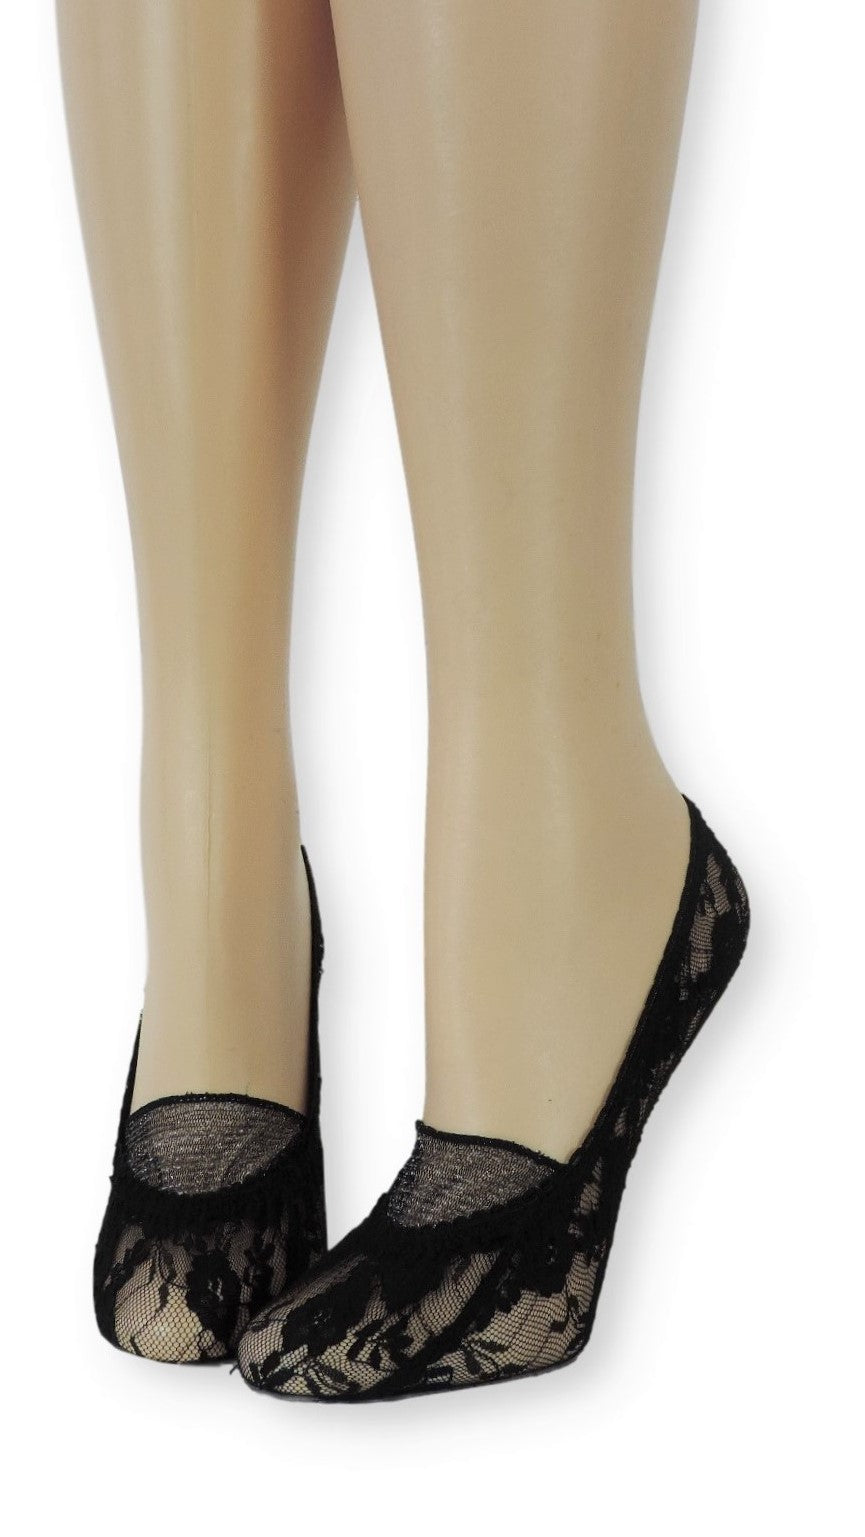 Obsidian Ankle Mesh Socks with Closed lace - Global Trendz Fashion®